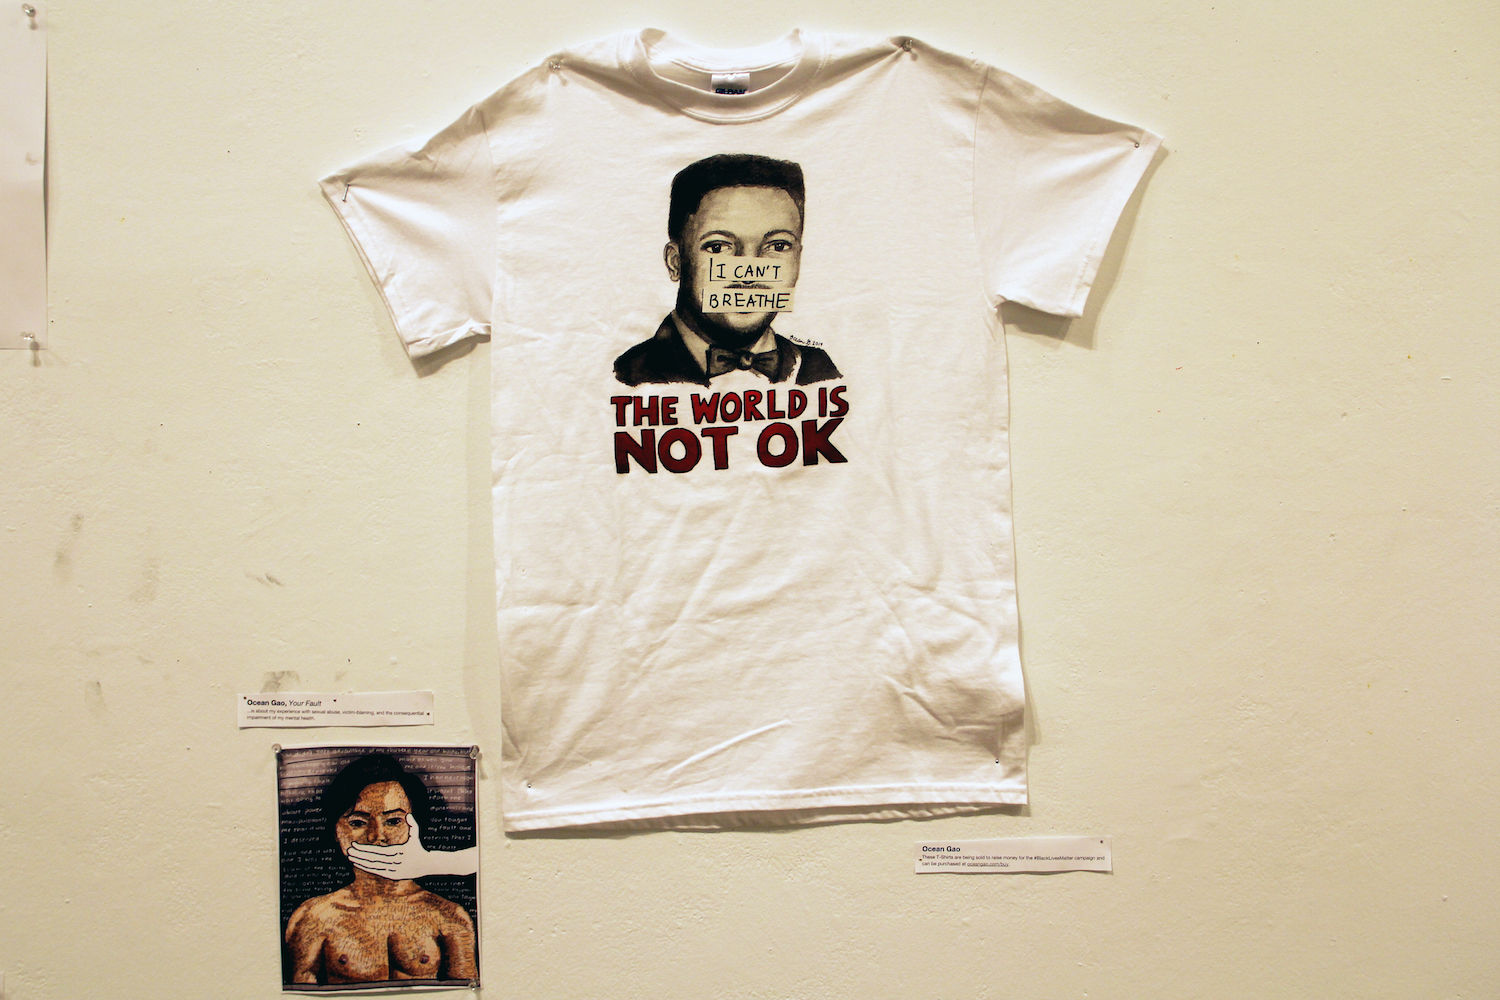 Ocean Gao '19 exhibited their political voice through the platform of art, including a t-shirt they designed to raise money for the #BlackLivesMatter campaign.